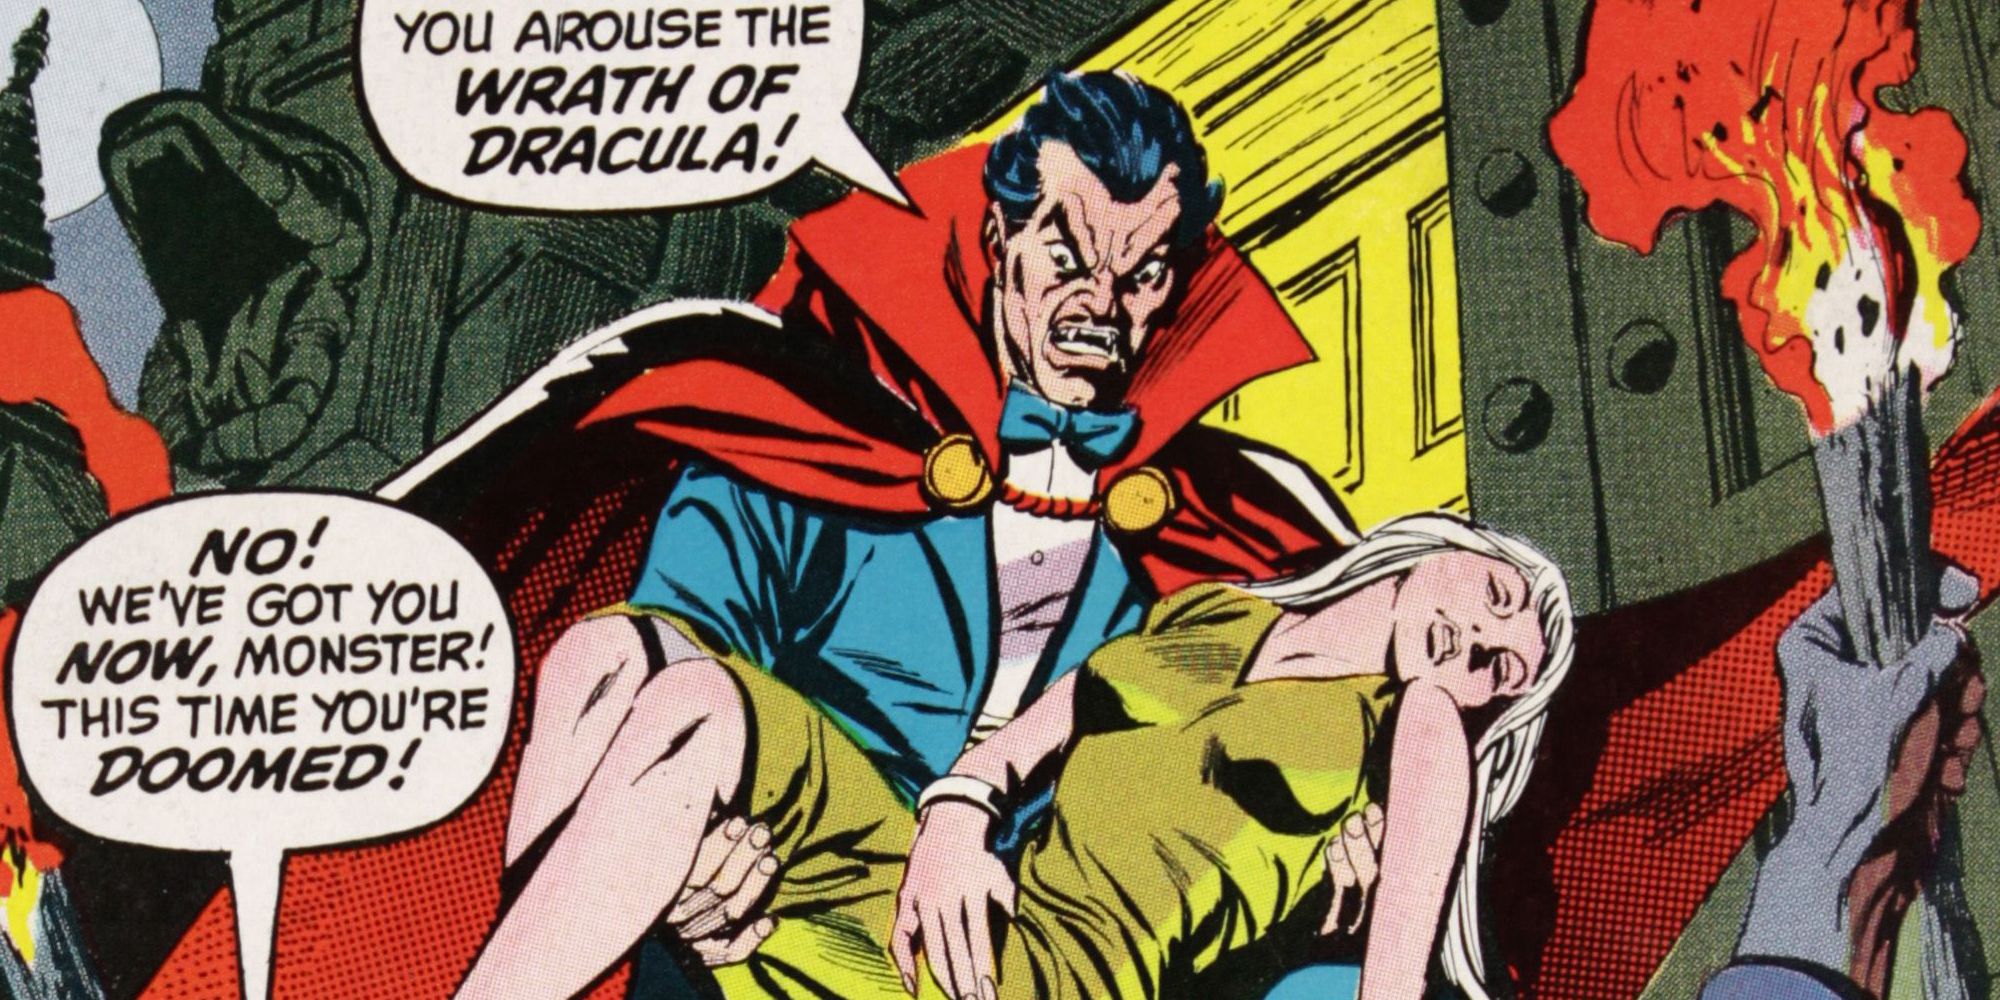 Dracula threatens a mob while carrying an unconscious woman in Marvel Comics.